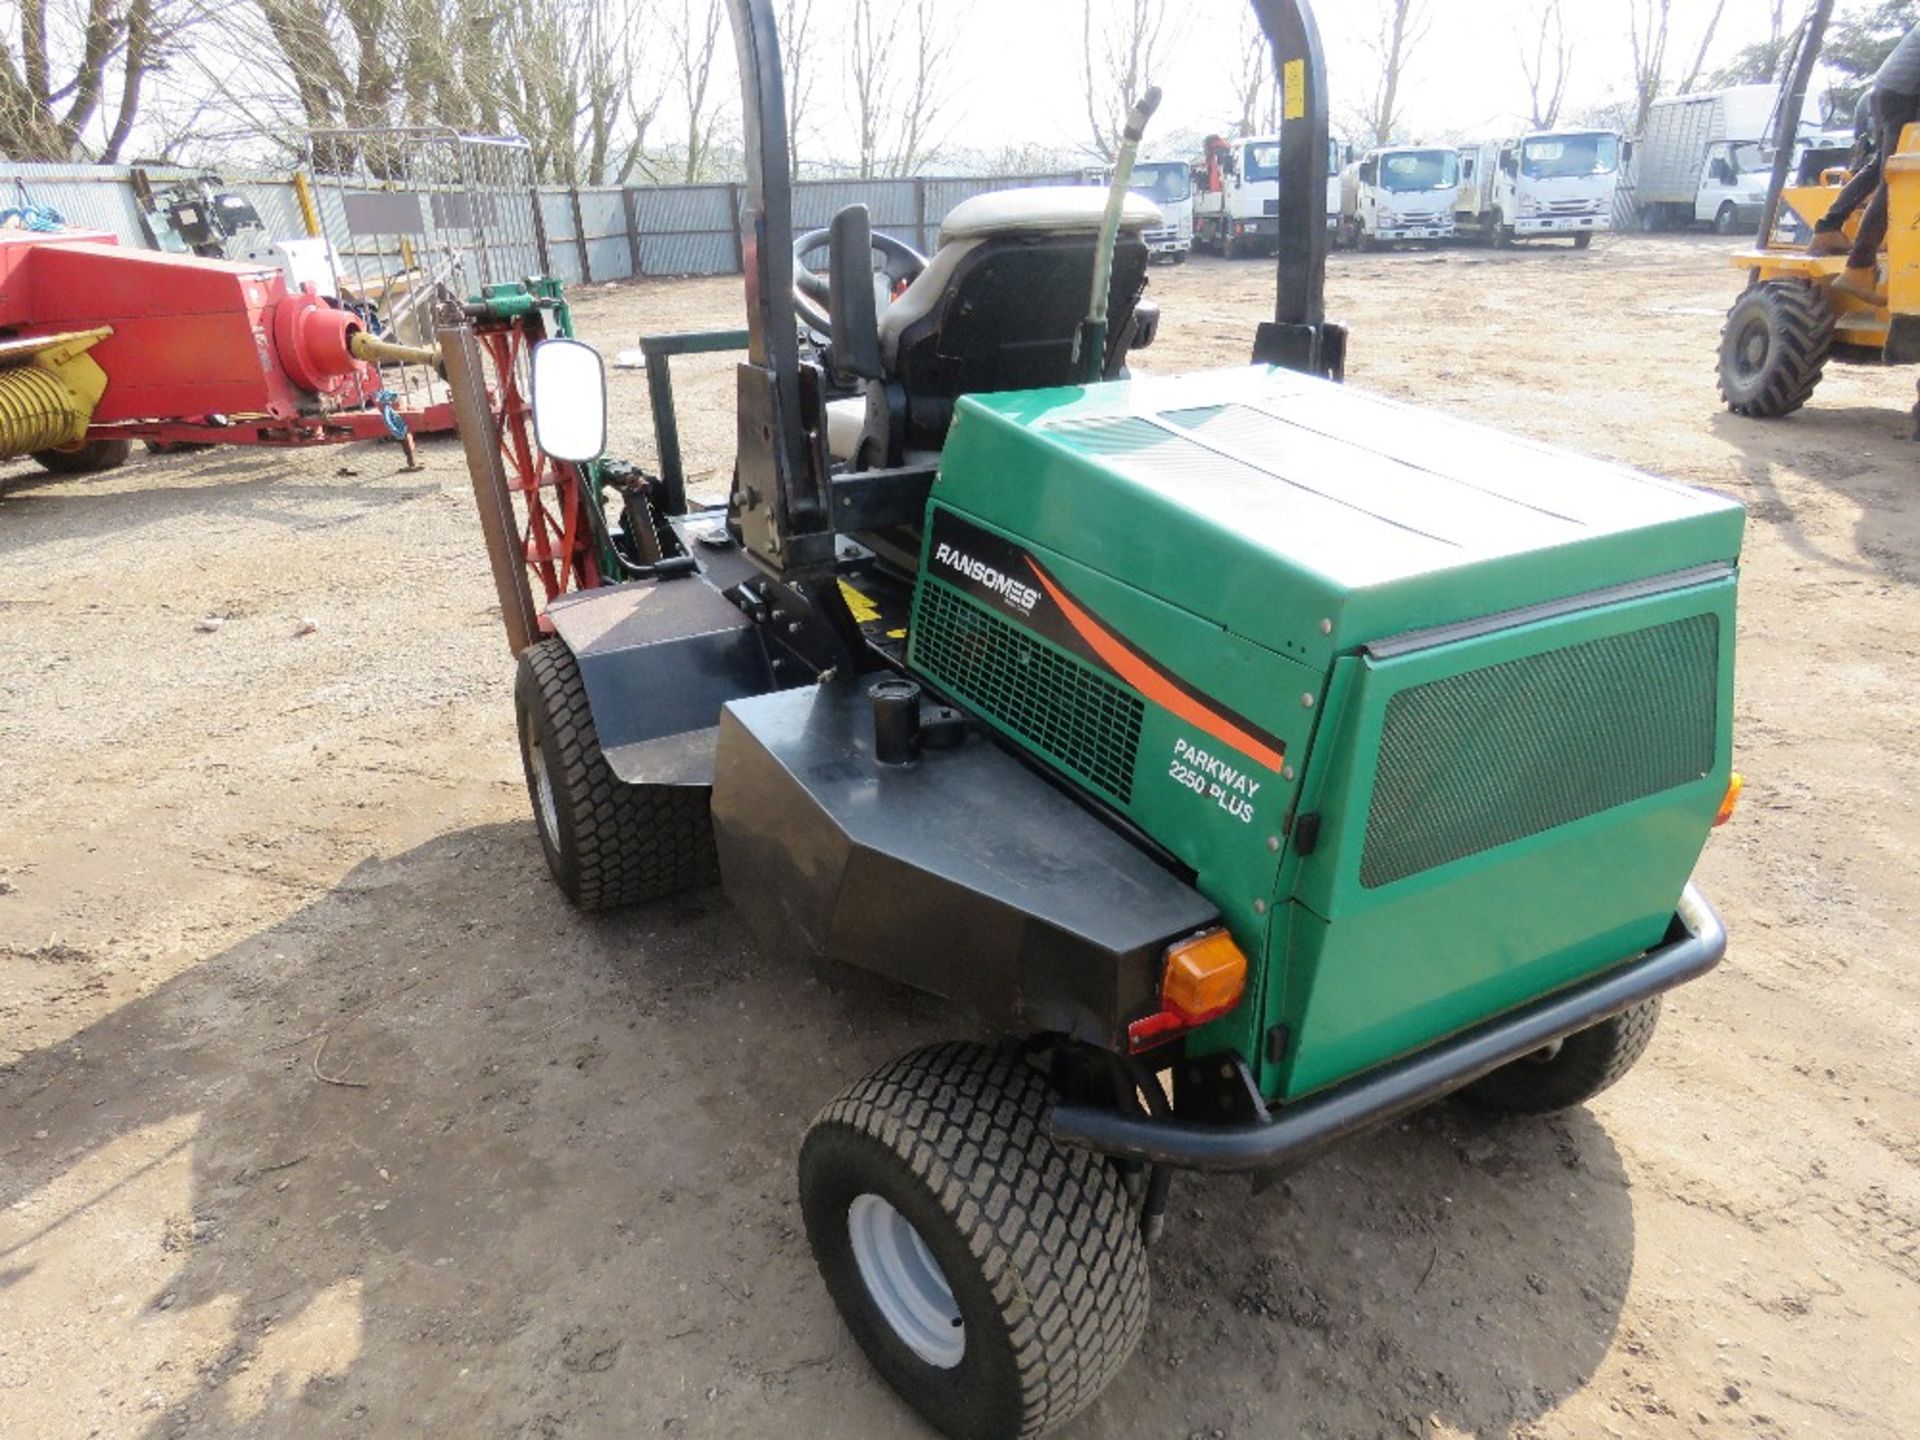 RANSOMES PARKWAY 2250 PLUS PROFESSIONAL TRIPLE RIDE ON MOWER, 4WD, 3300 REC HOURS. DIRECT FROM GOLF - Bild 4 aus 11